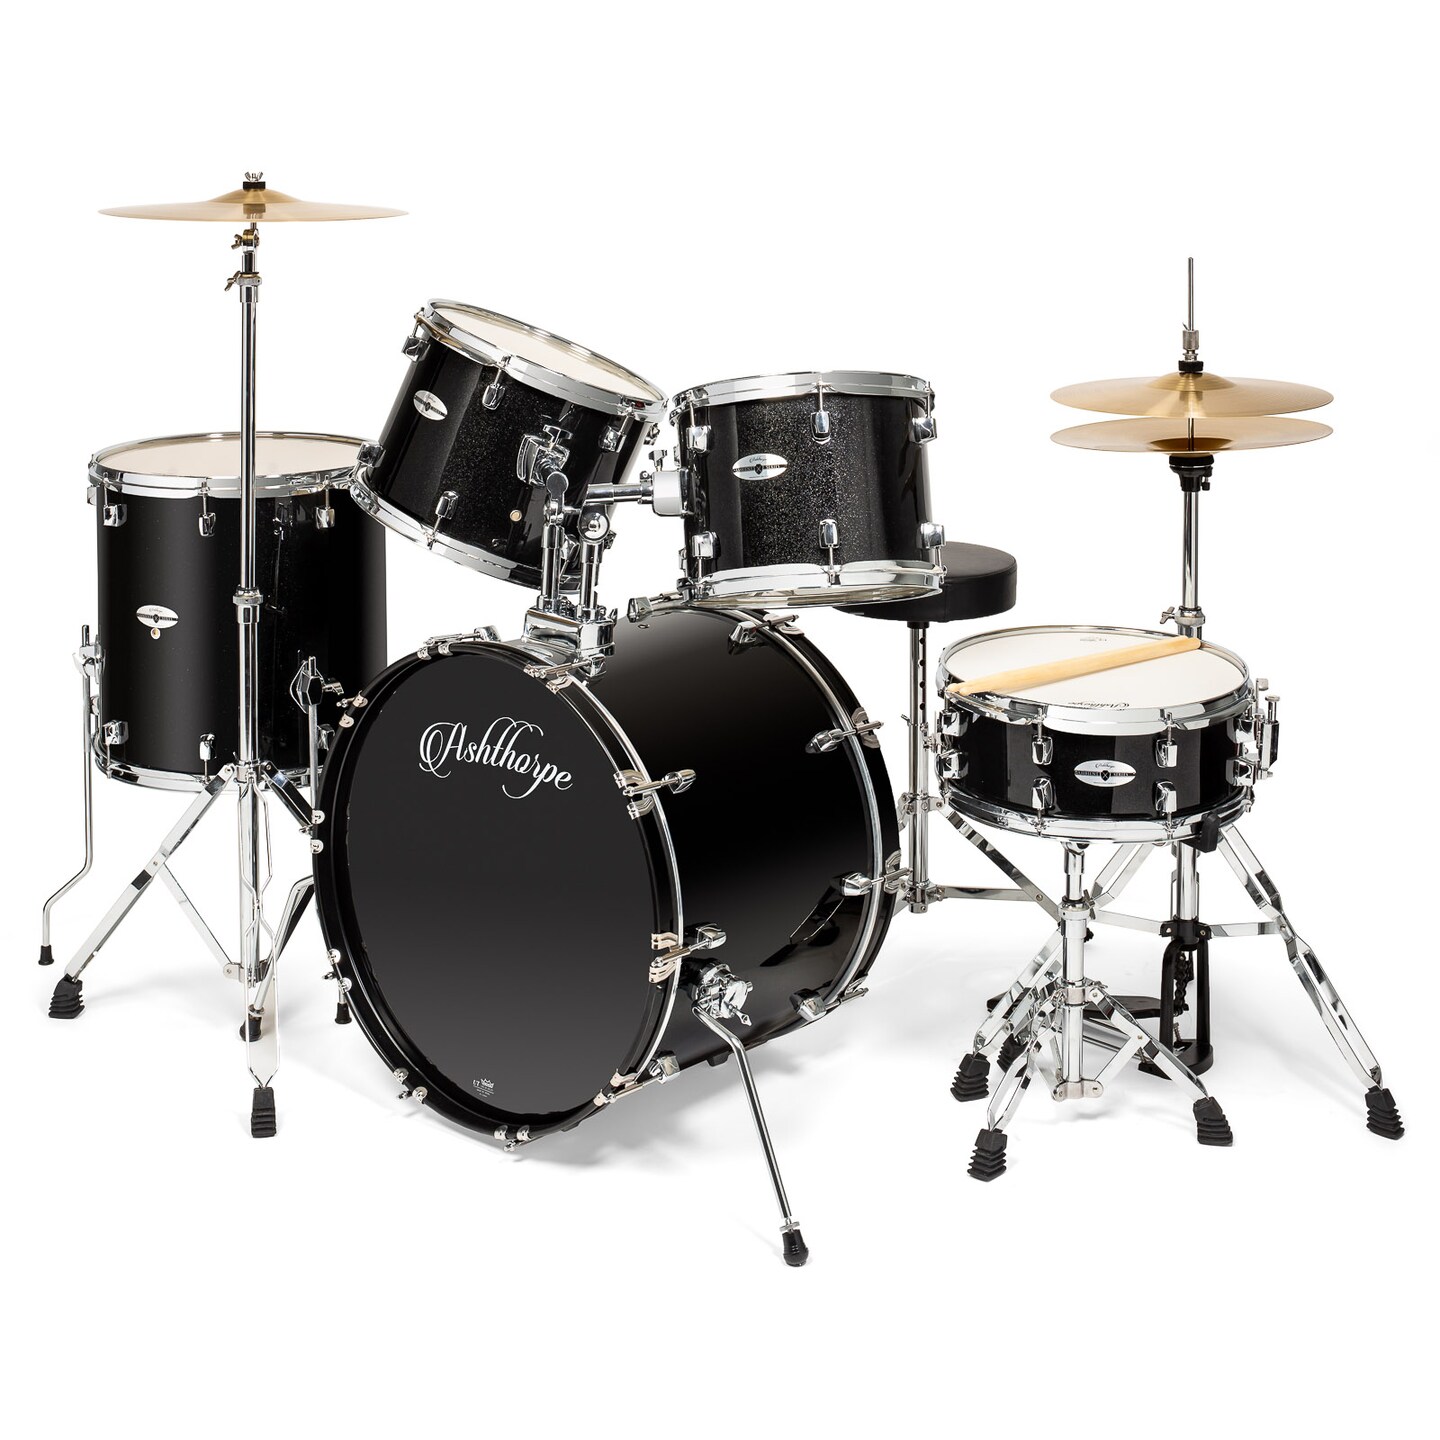 Ashthorpe 5-Piece Full Size Adult Drum Set with Remo Heads & Premium Brass Cymbals - Complete Professional Percussion Kit with Chrome Hardware